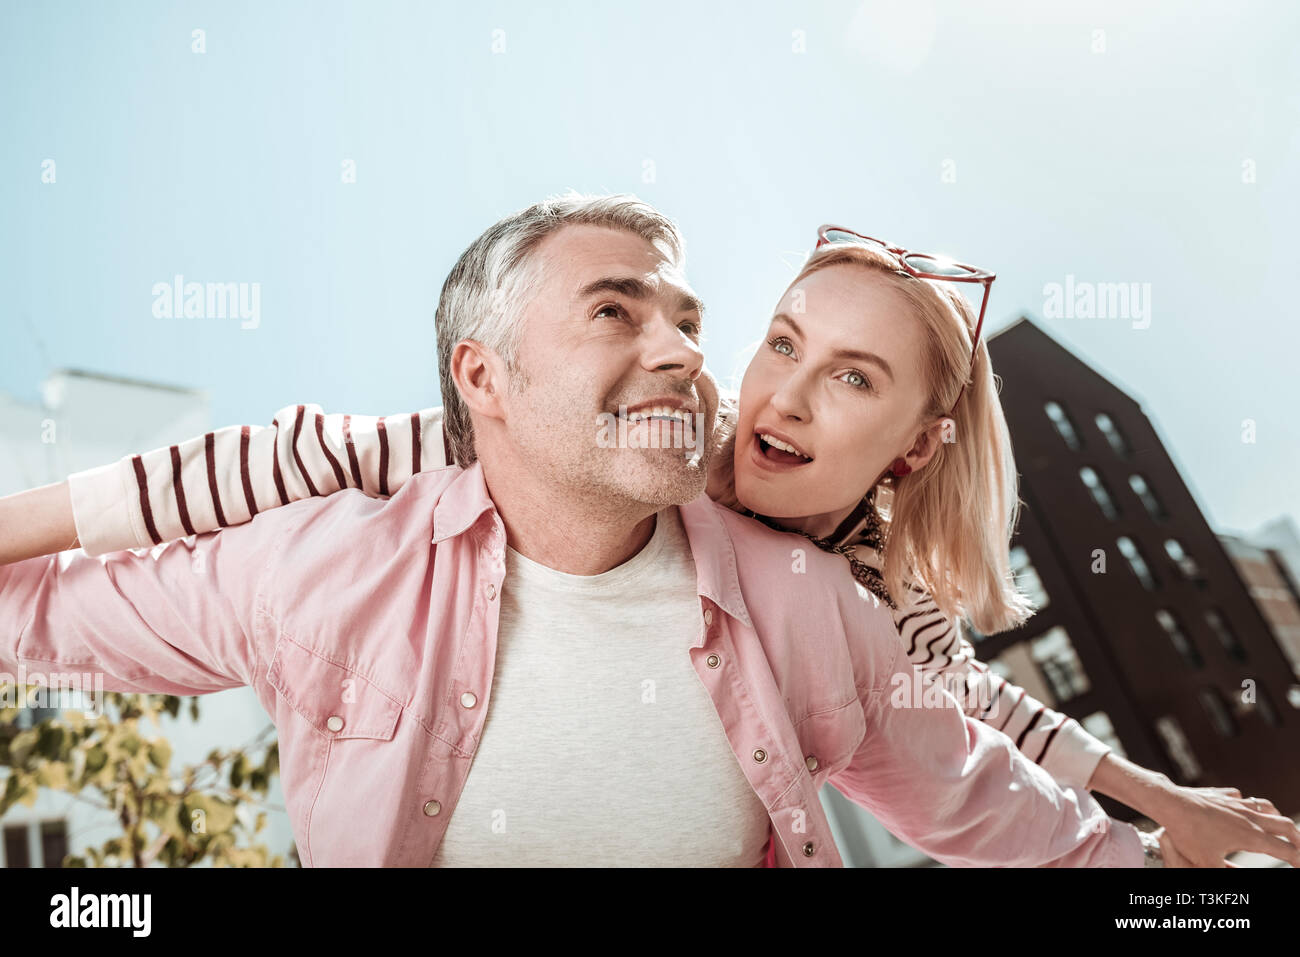 Low angle of a positive happy couple Stock Photo